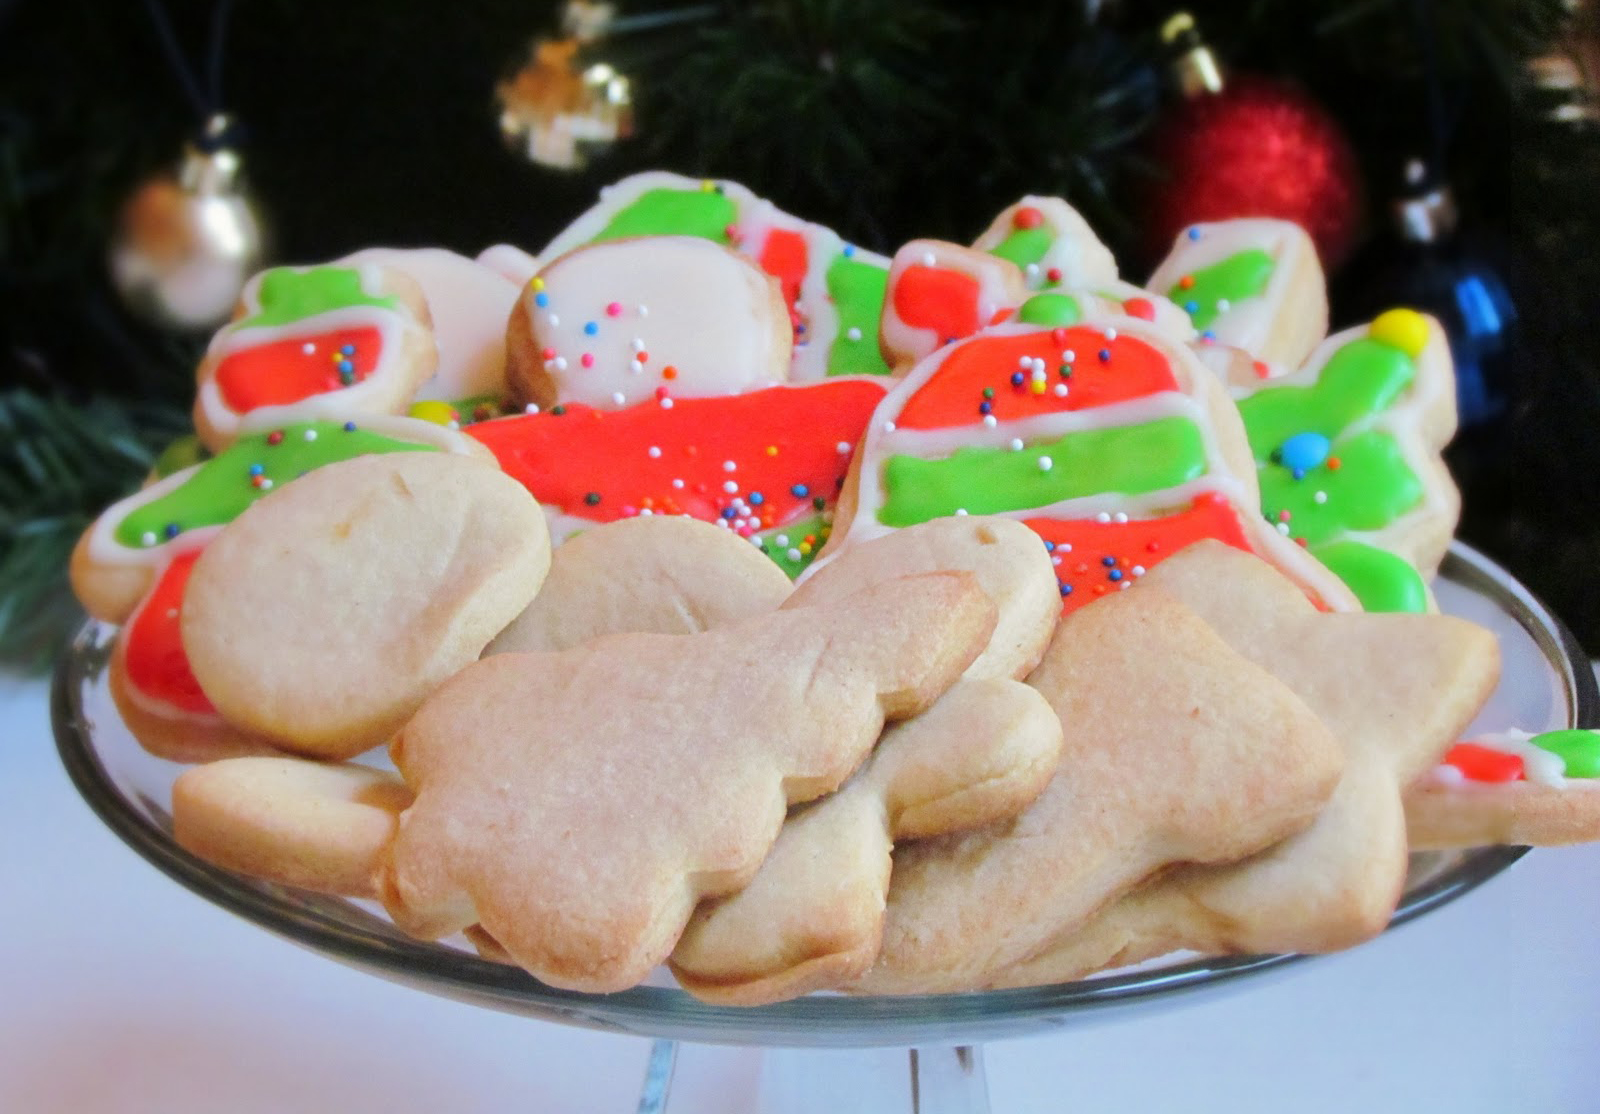 Orange sugar cookies and holiday time!